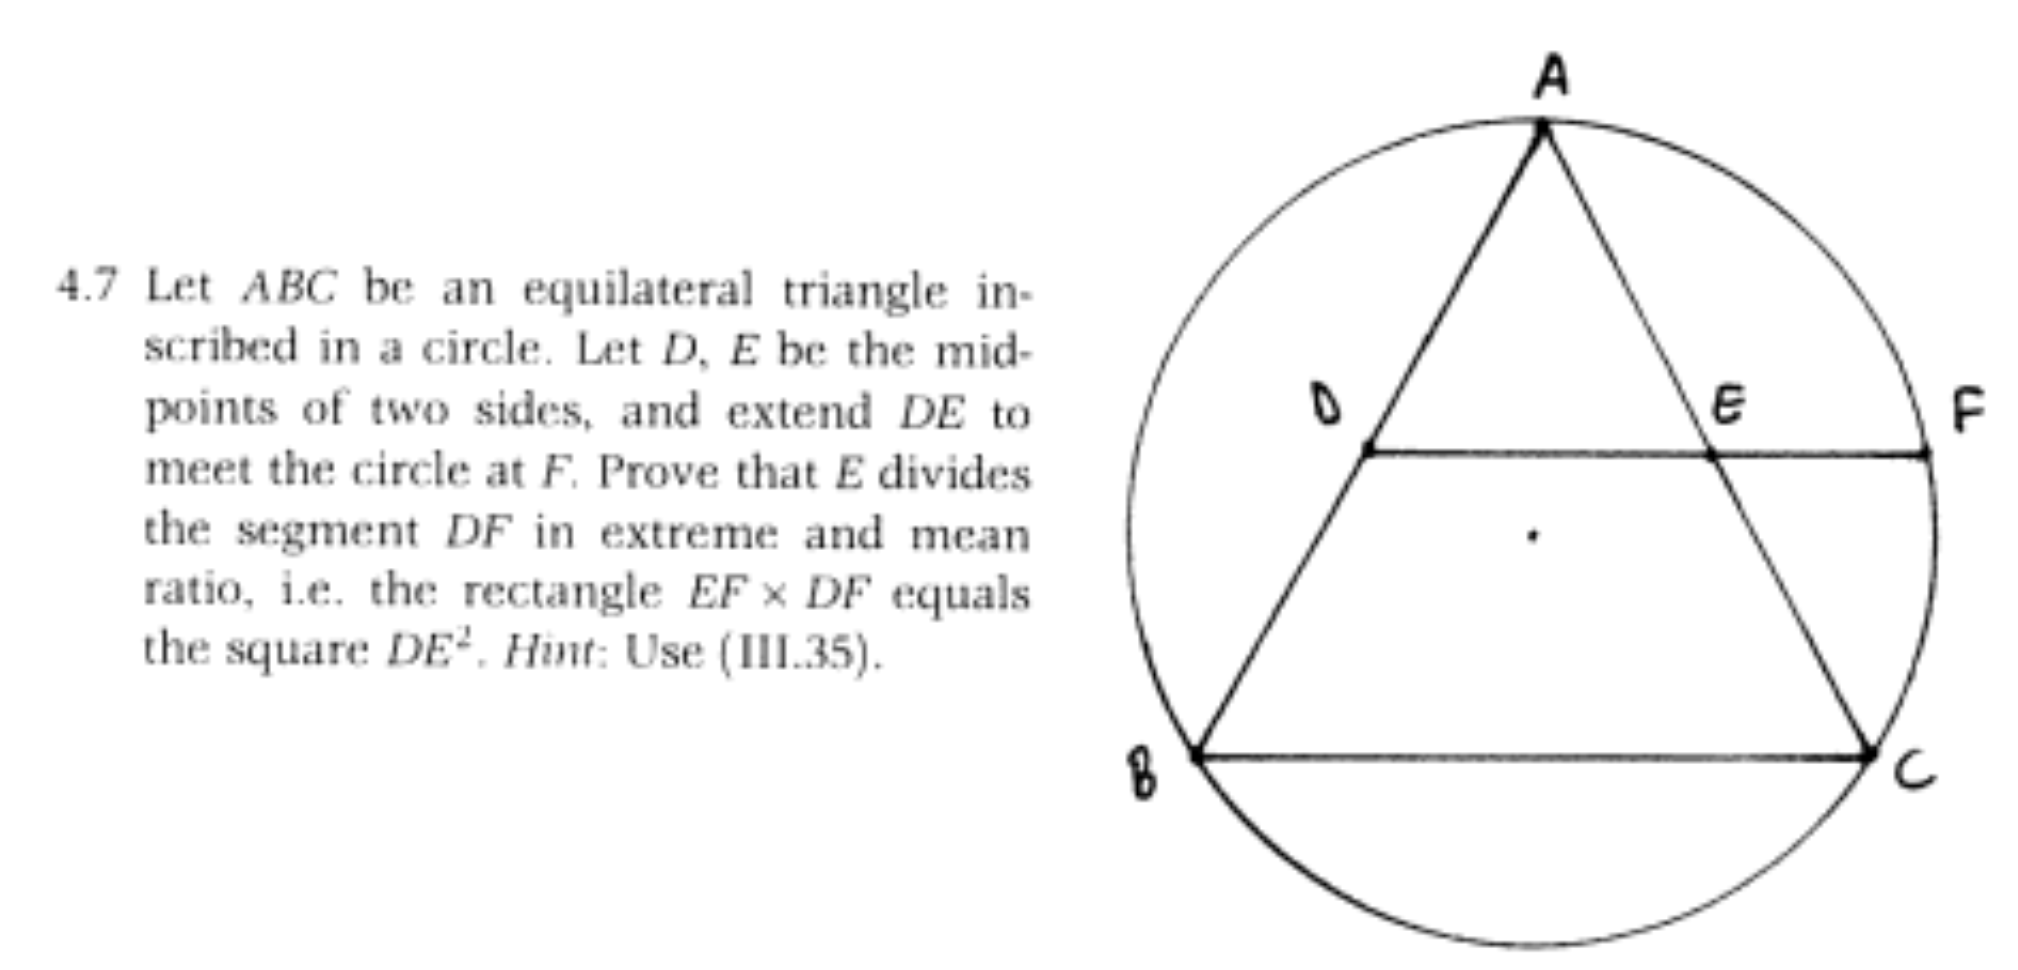 А
4.7 Let ABC be an equilateral triangle in
scribed in a circle. Let D, E be the mid
points of two sides, and extend DE to
meet the circle at F. Prove that E divides
F
the segment DF in extreme and mean
ratio, ie. the rectangle EF x DF equals
the square DE. Hint: Use (III.35)
